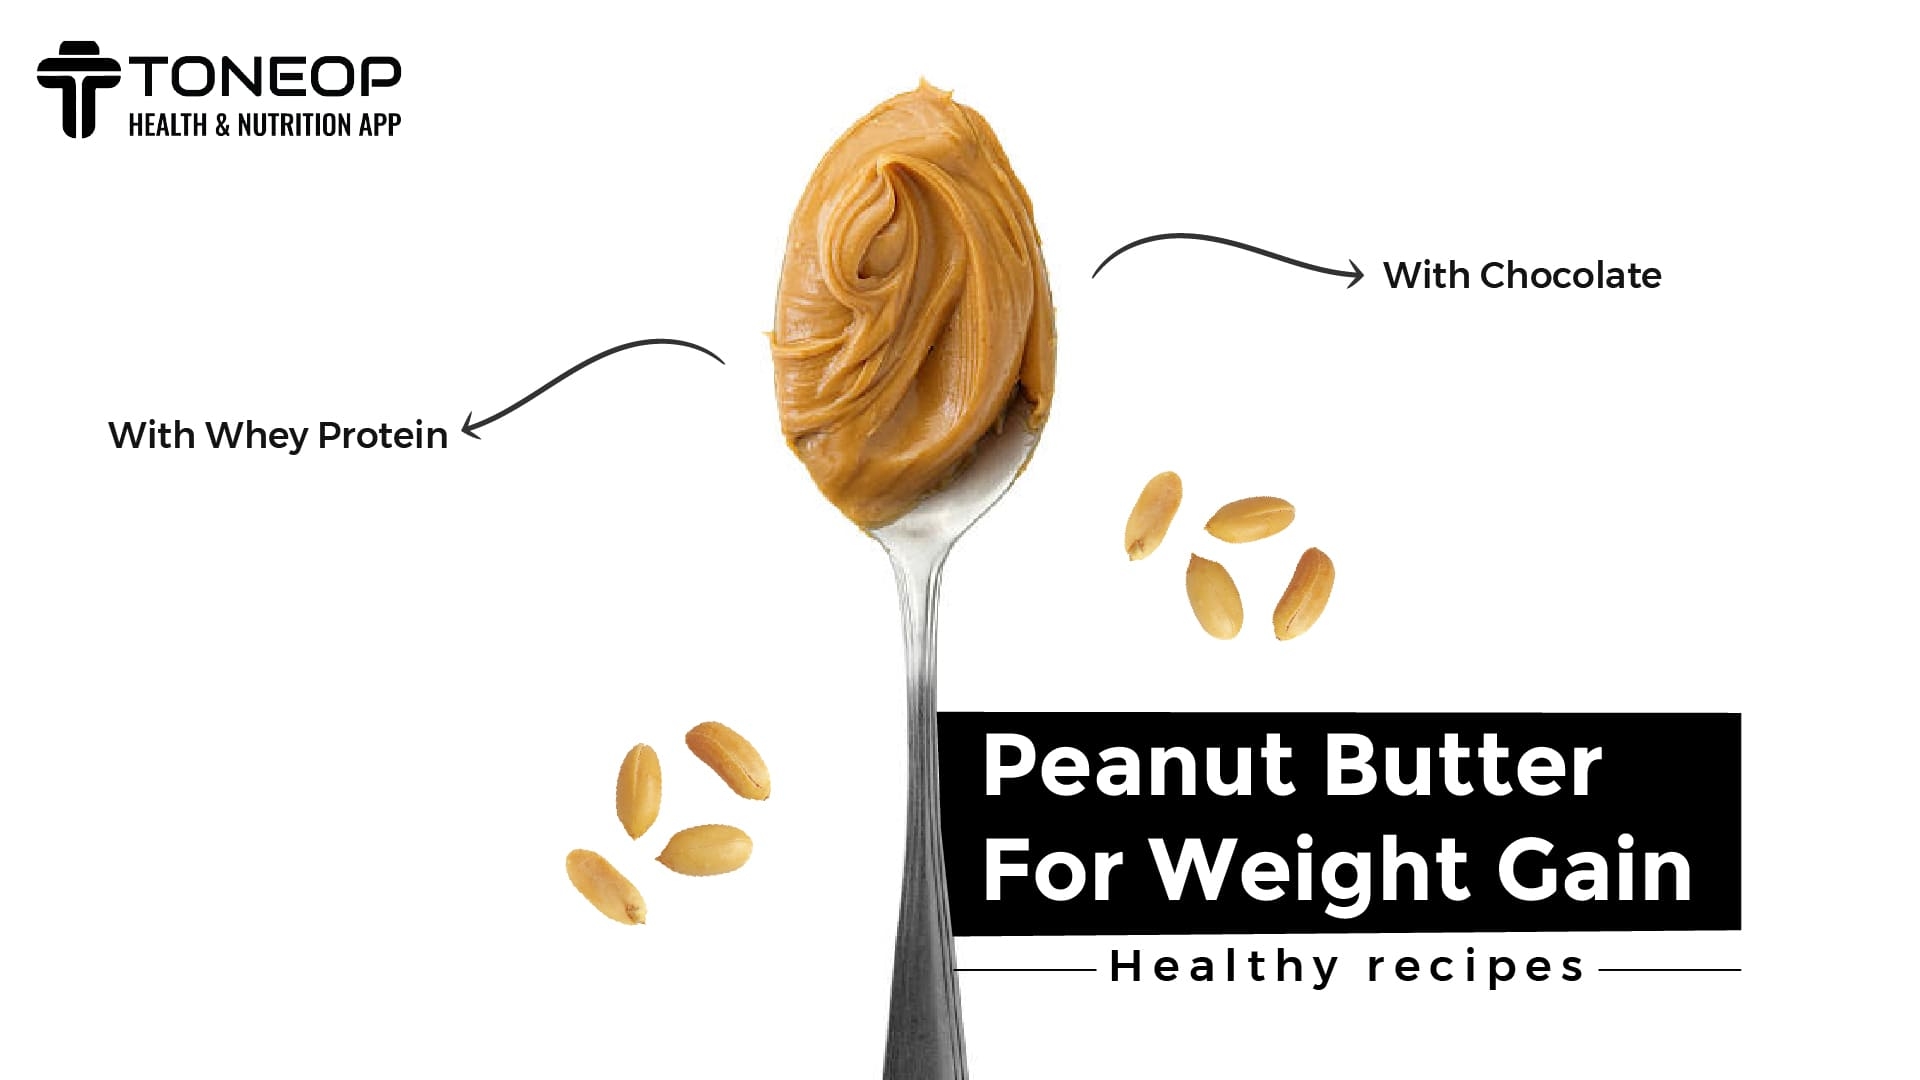 Peanut Butter For Weight Gain: Benefits And Recipes